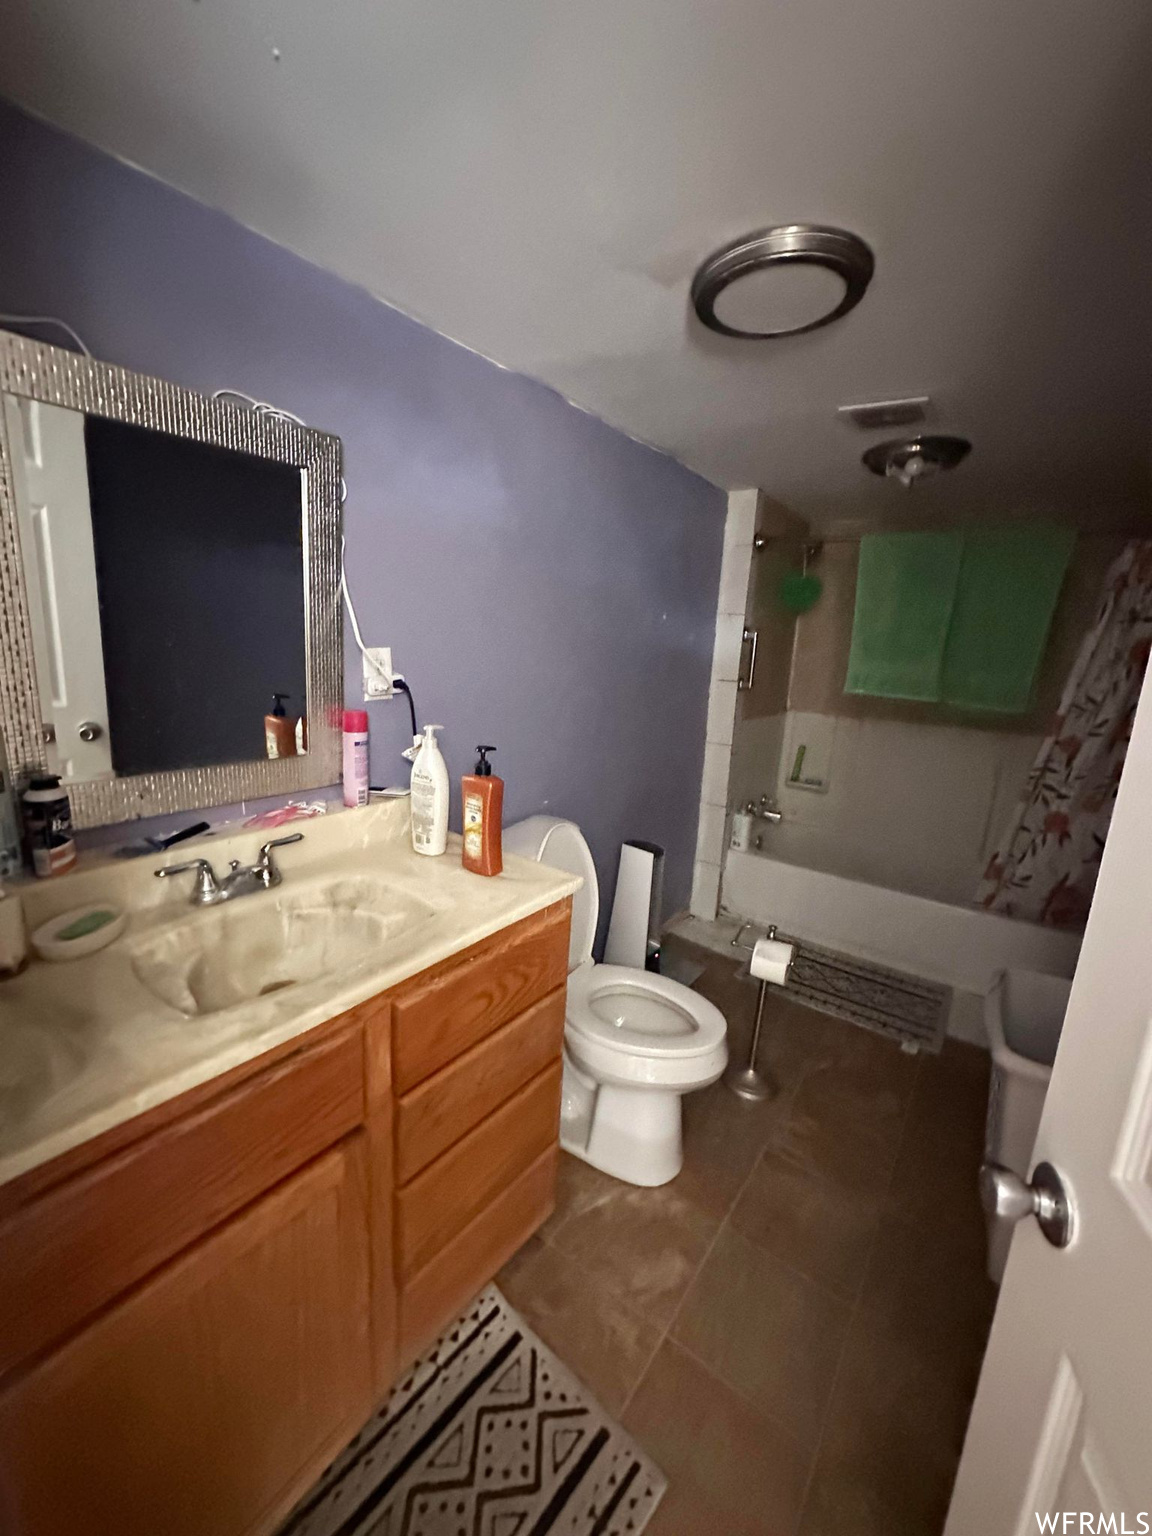 Full bathroom featuring toilet, tile floors, tub / shower combination, and large vanity